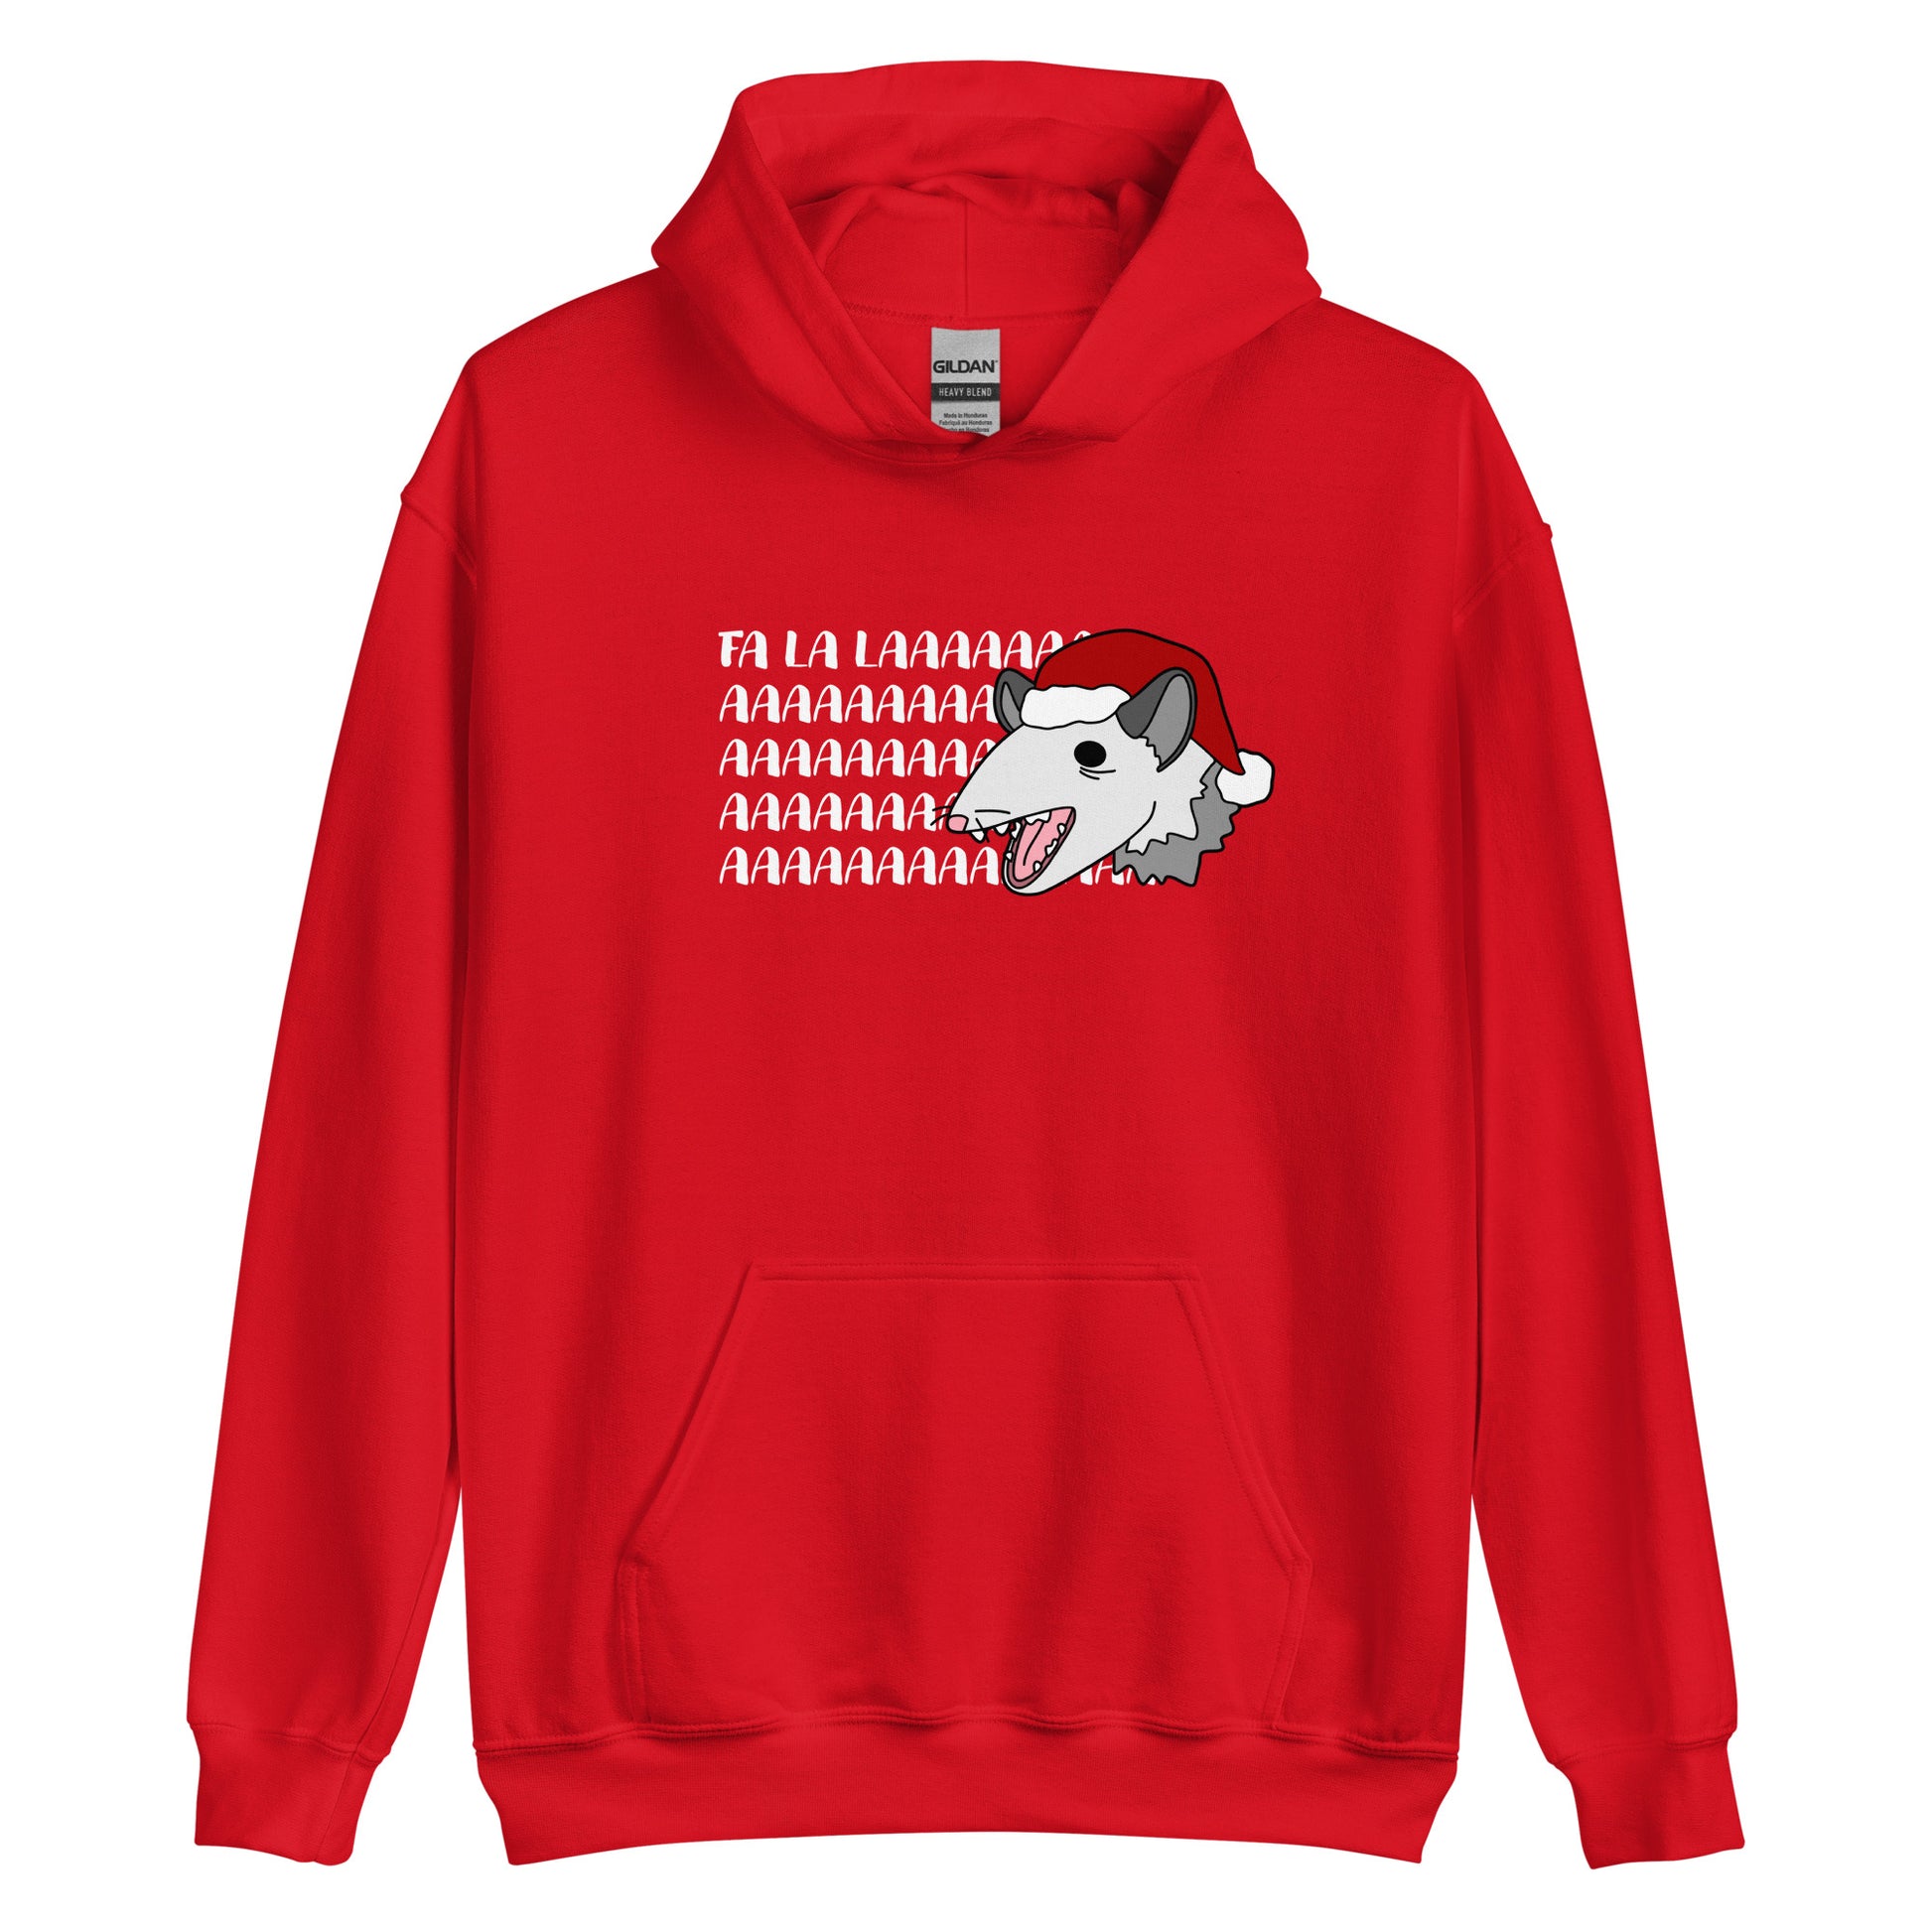 A red hooded sweatshirt featuring an illustration of a possum wearing a Santa hat. The possum appears to be screaming, and text behind his head reads "FA LA LAAAAAA"